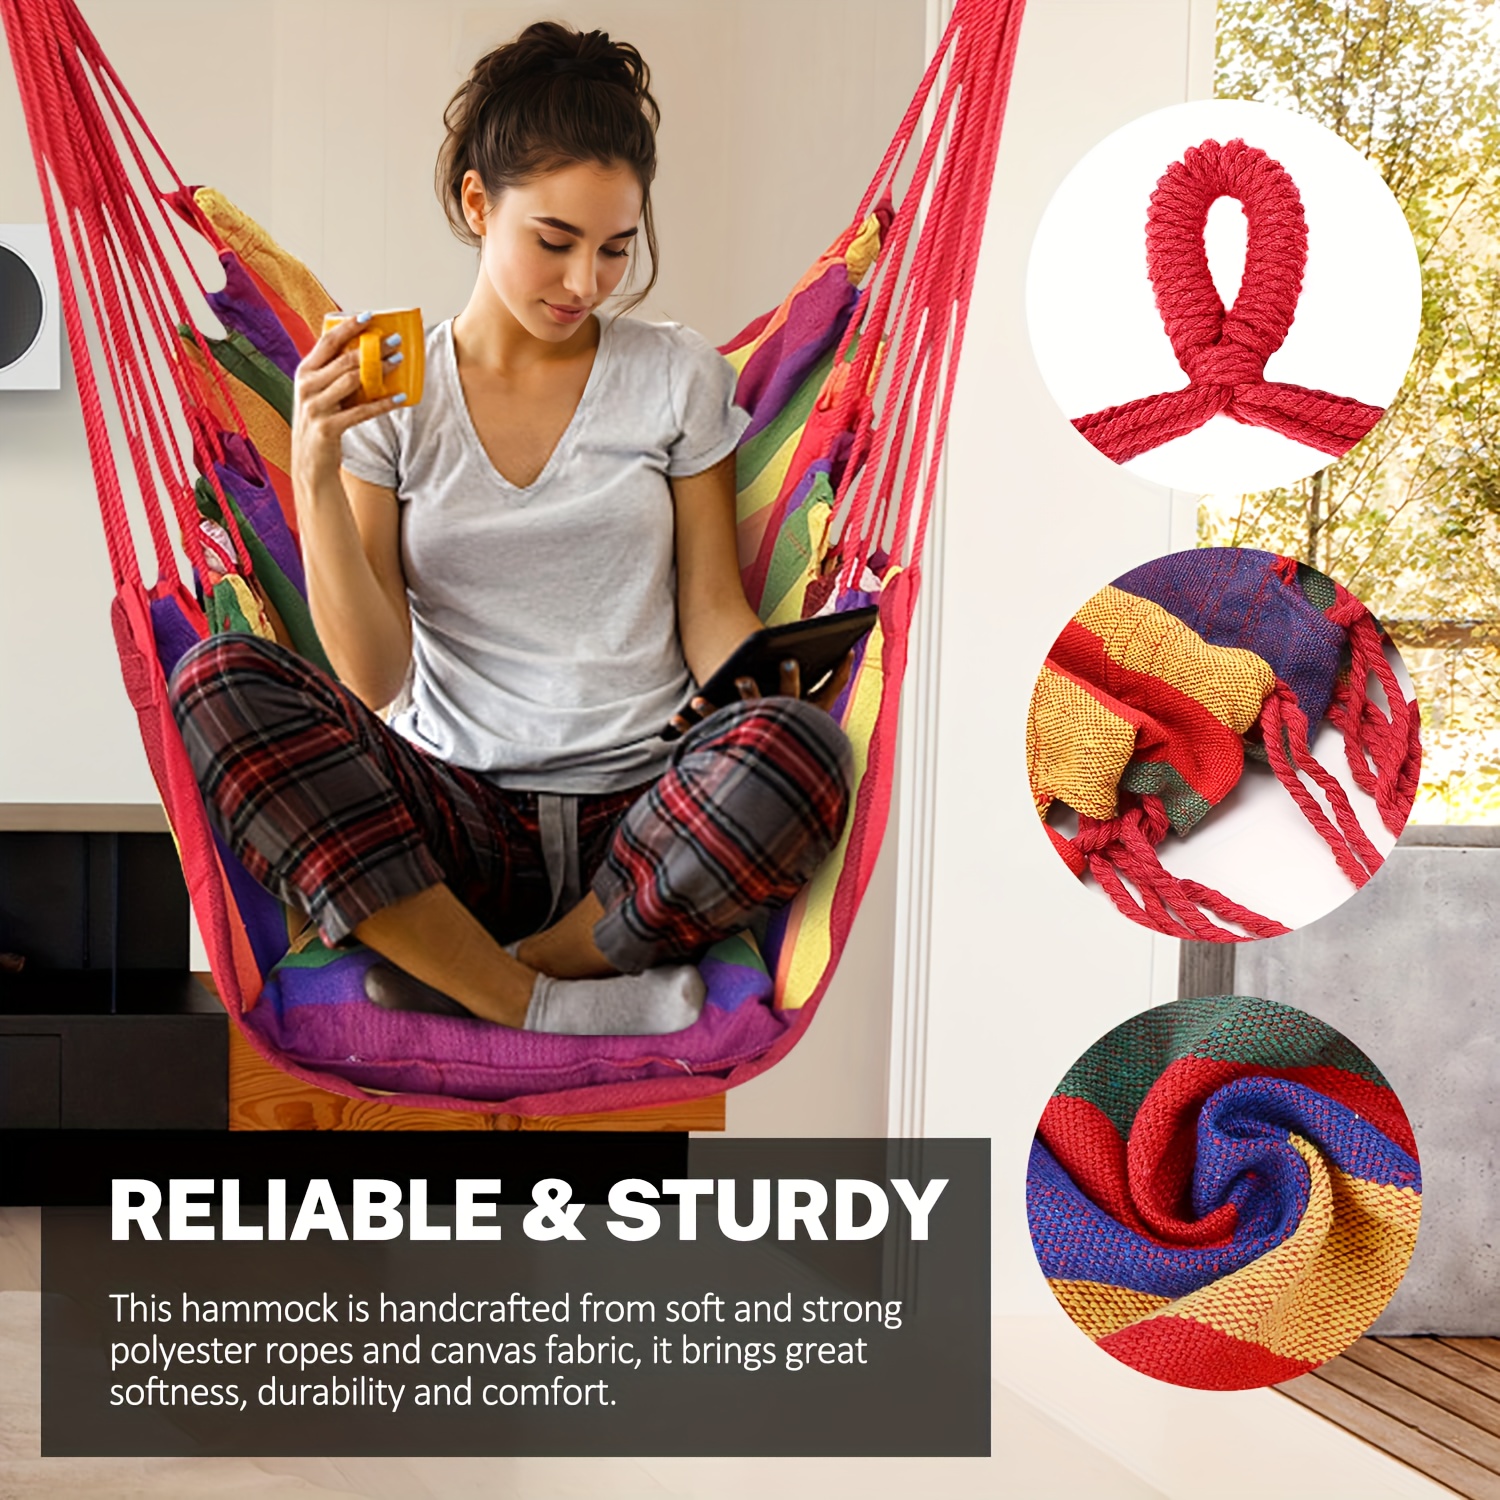 

1pc Hanging Hammock Chair, Striped Hammock Swing Chair With Knitted Mesh, With 2 Throw Pillows & 2 Tie Rope & Storage Bag, For Indoor & Outdoor Patio, Yard, Deck, Garden & Porch